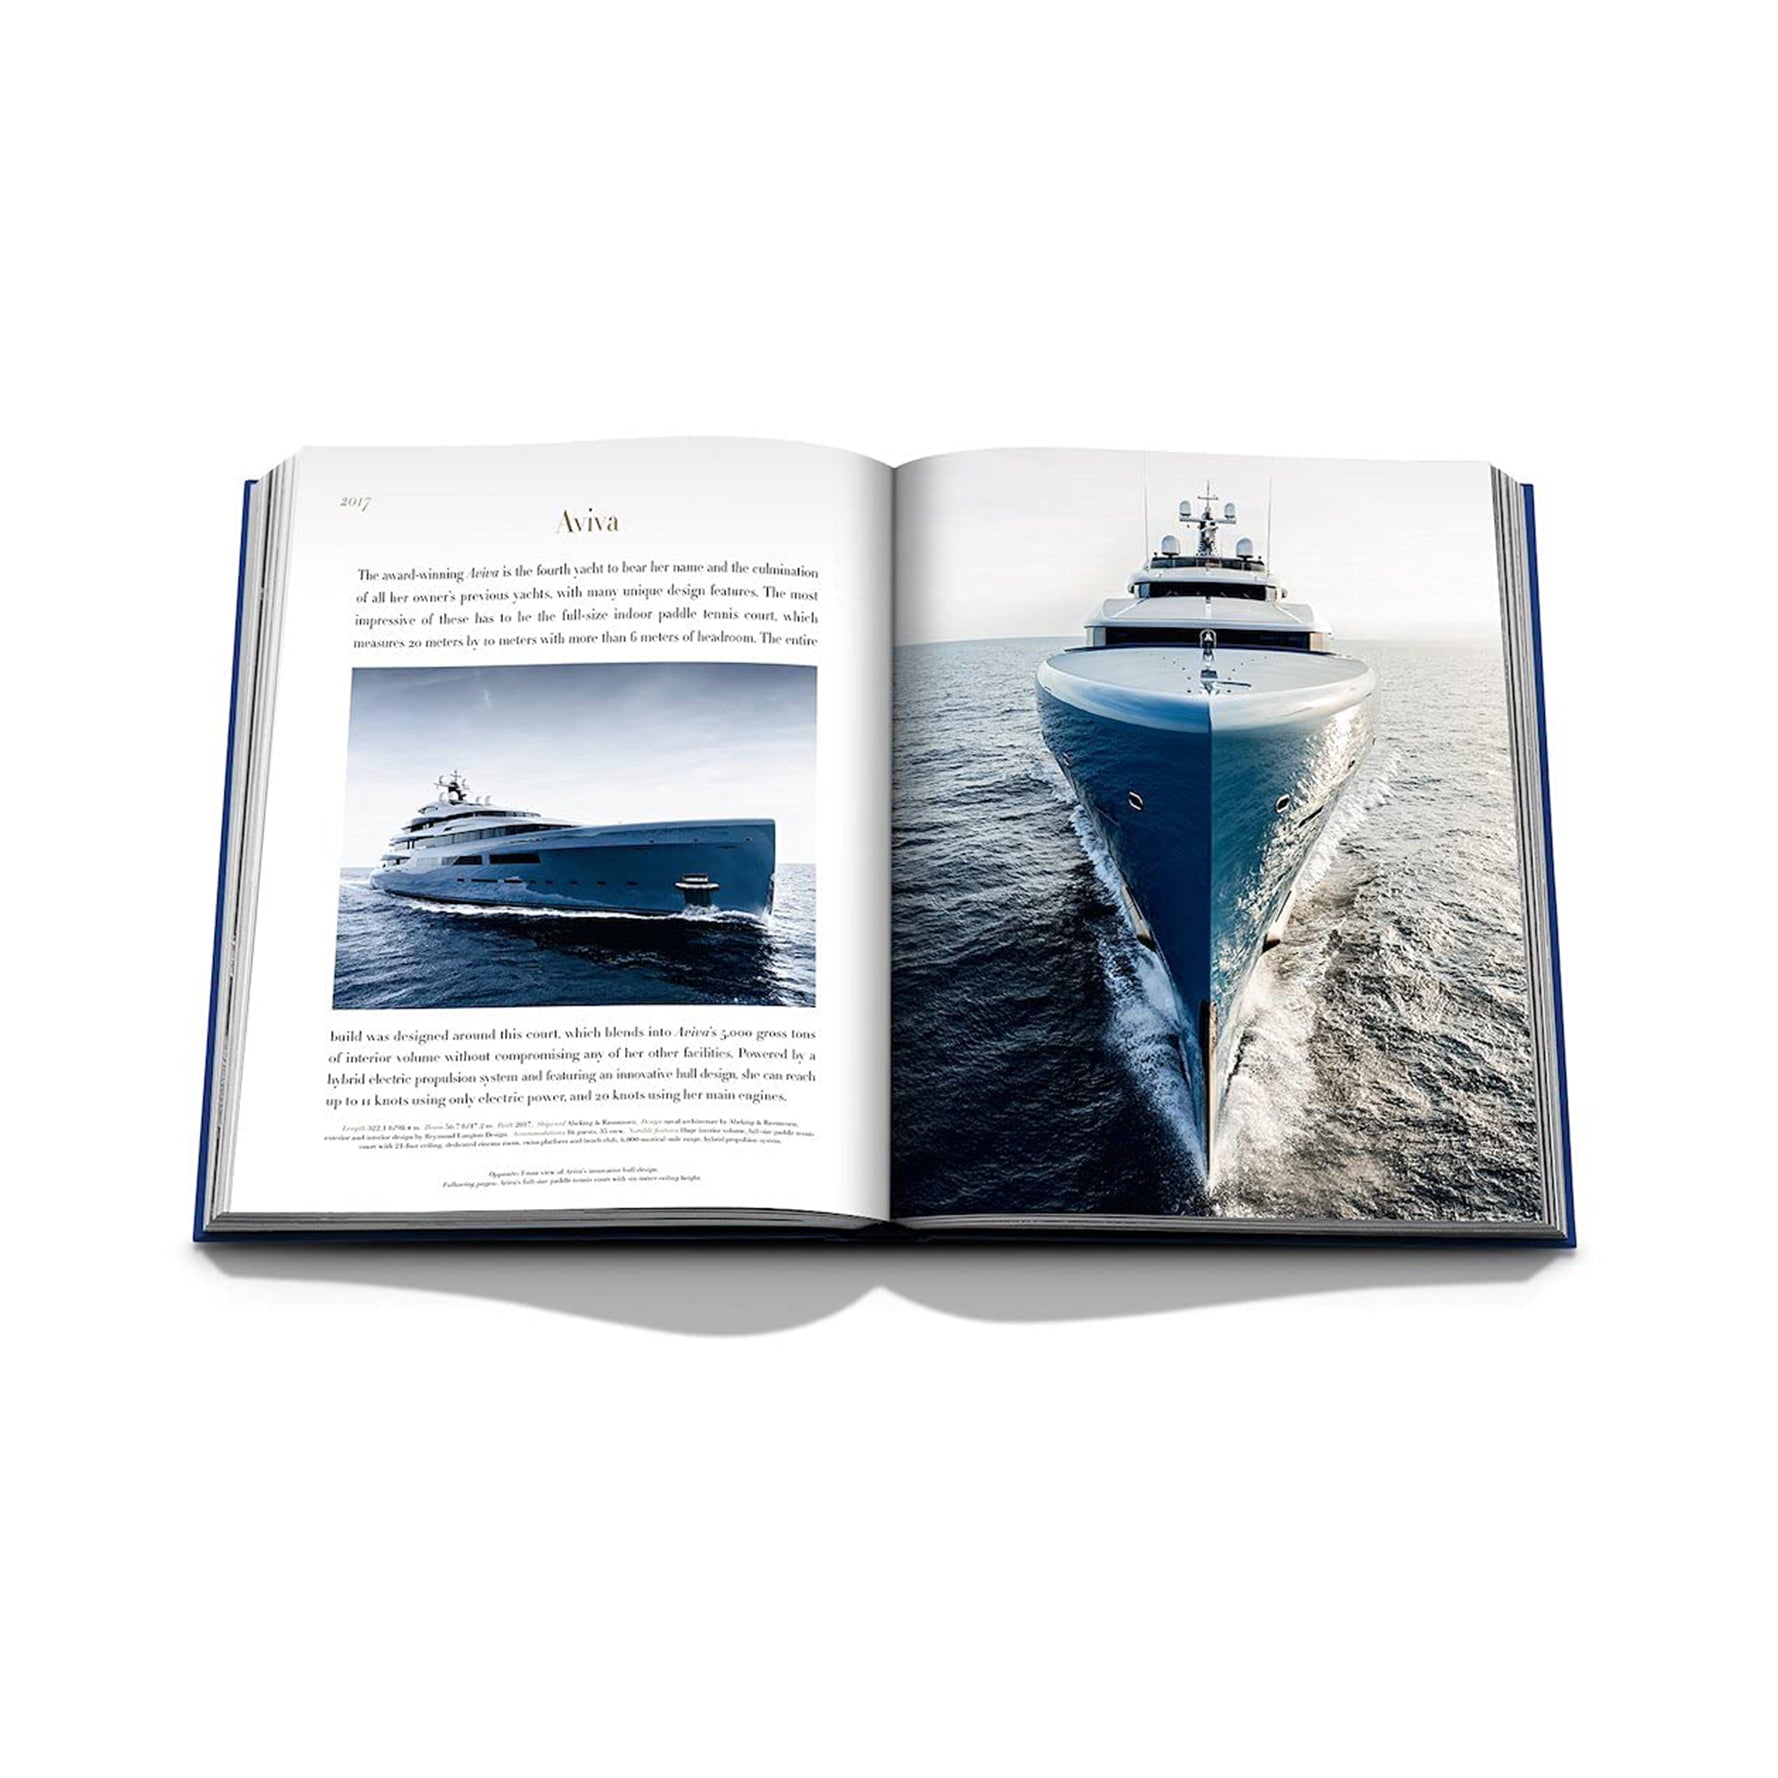 Yachts: The Impossible Collection by Assouline